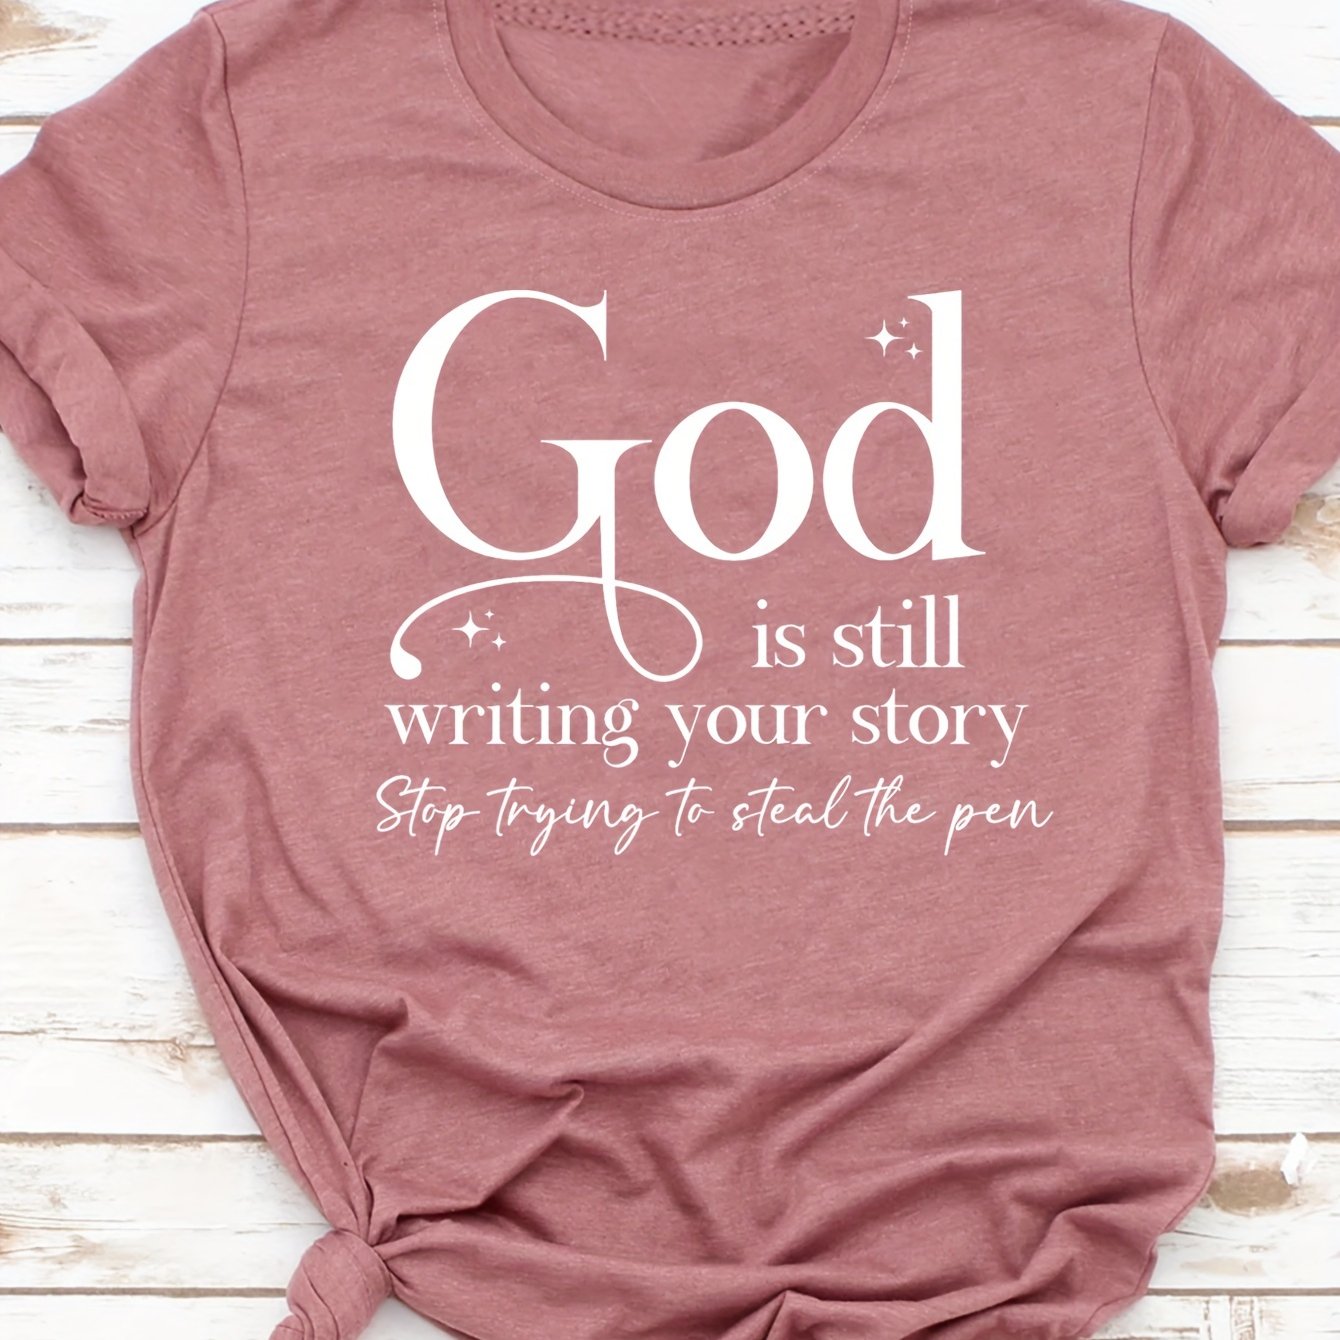 God is still writing your story T-shirt